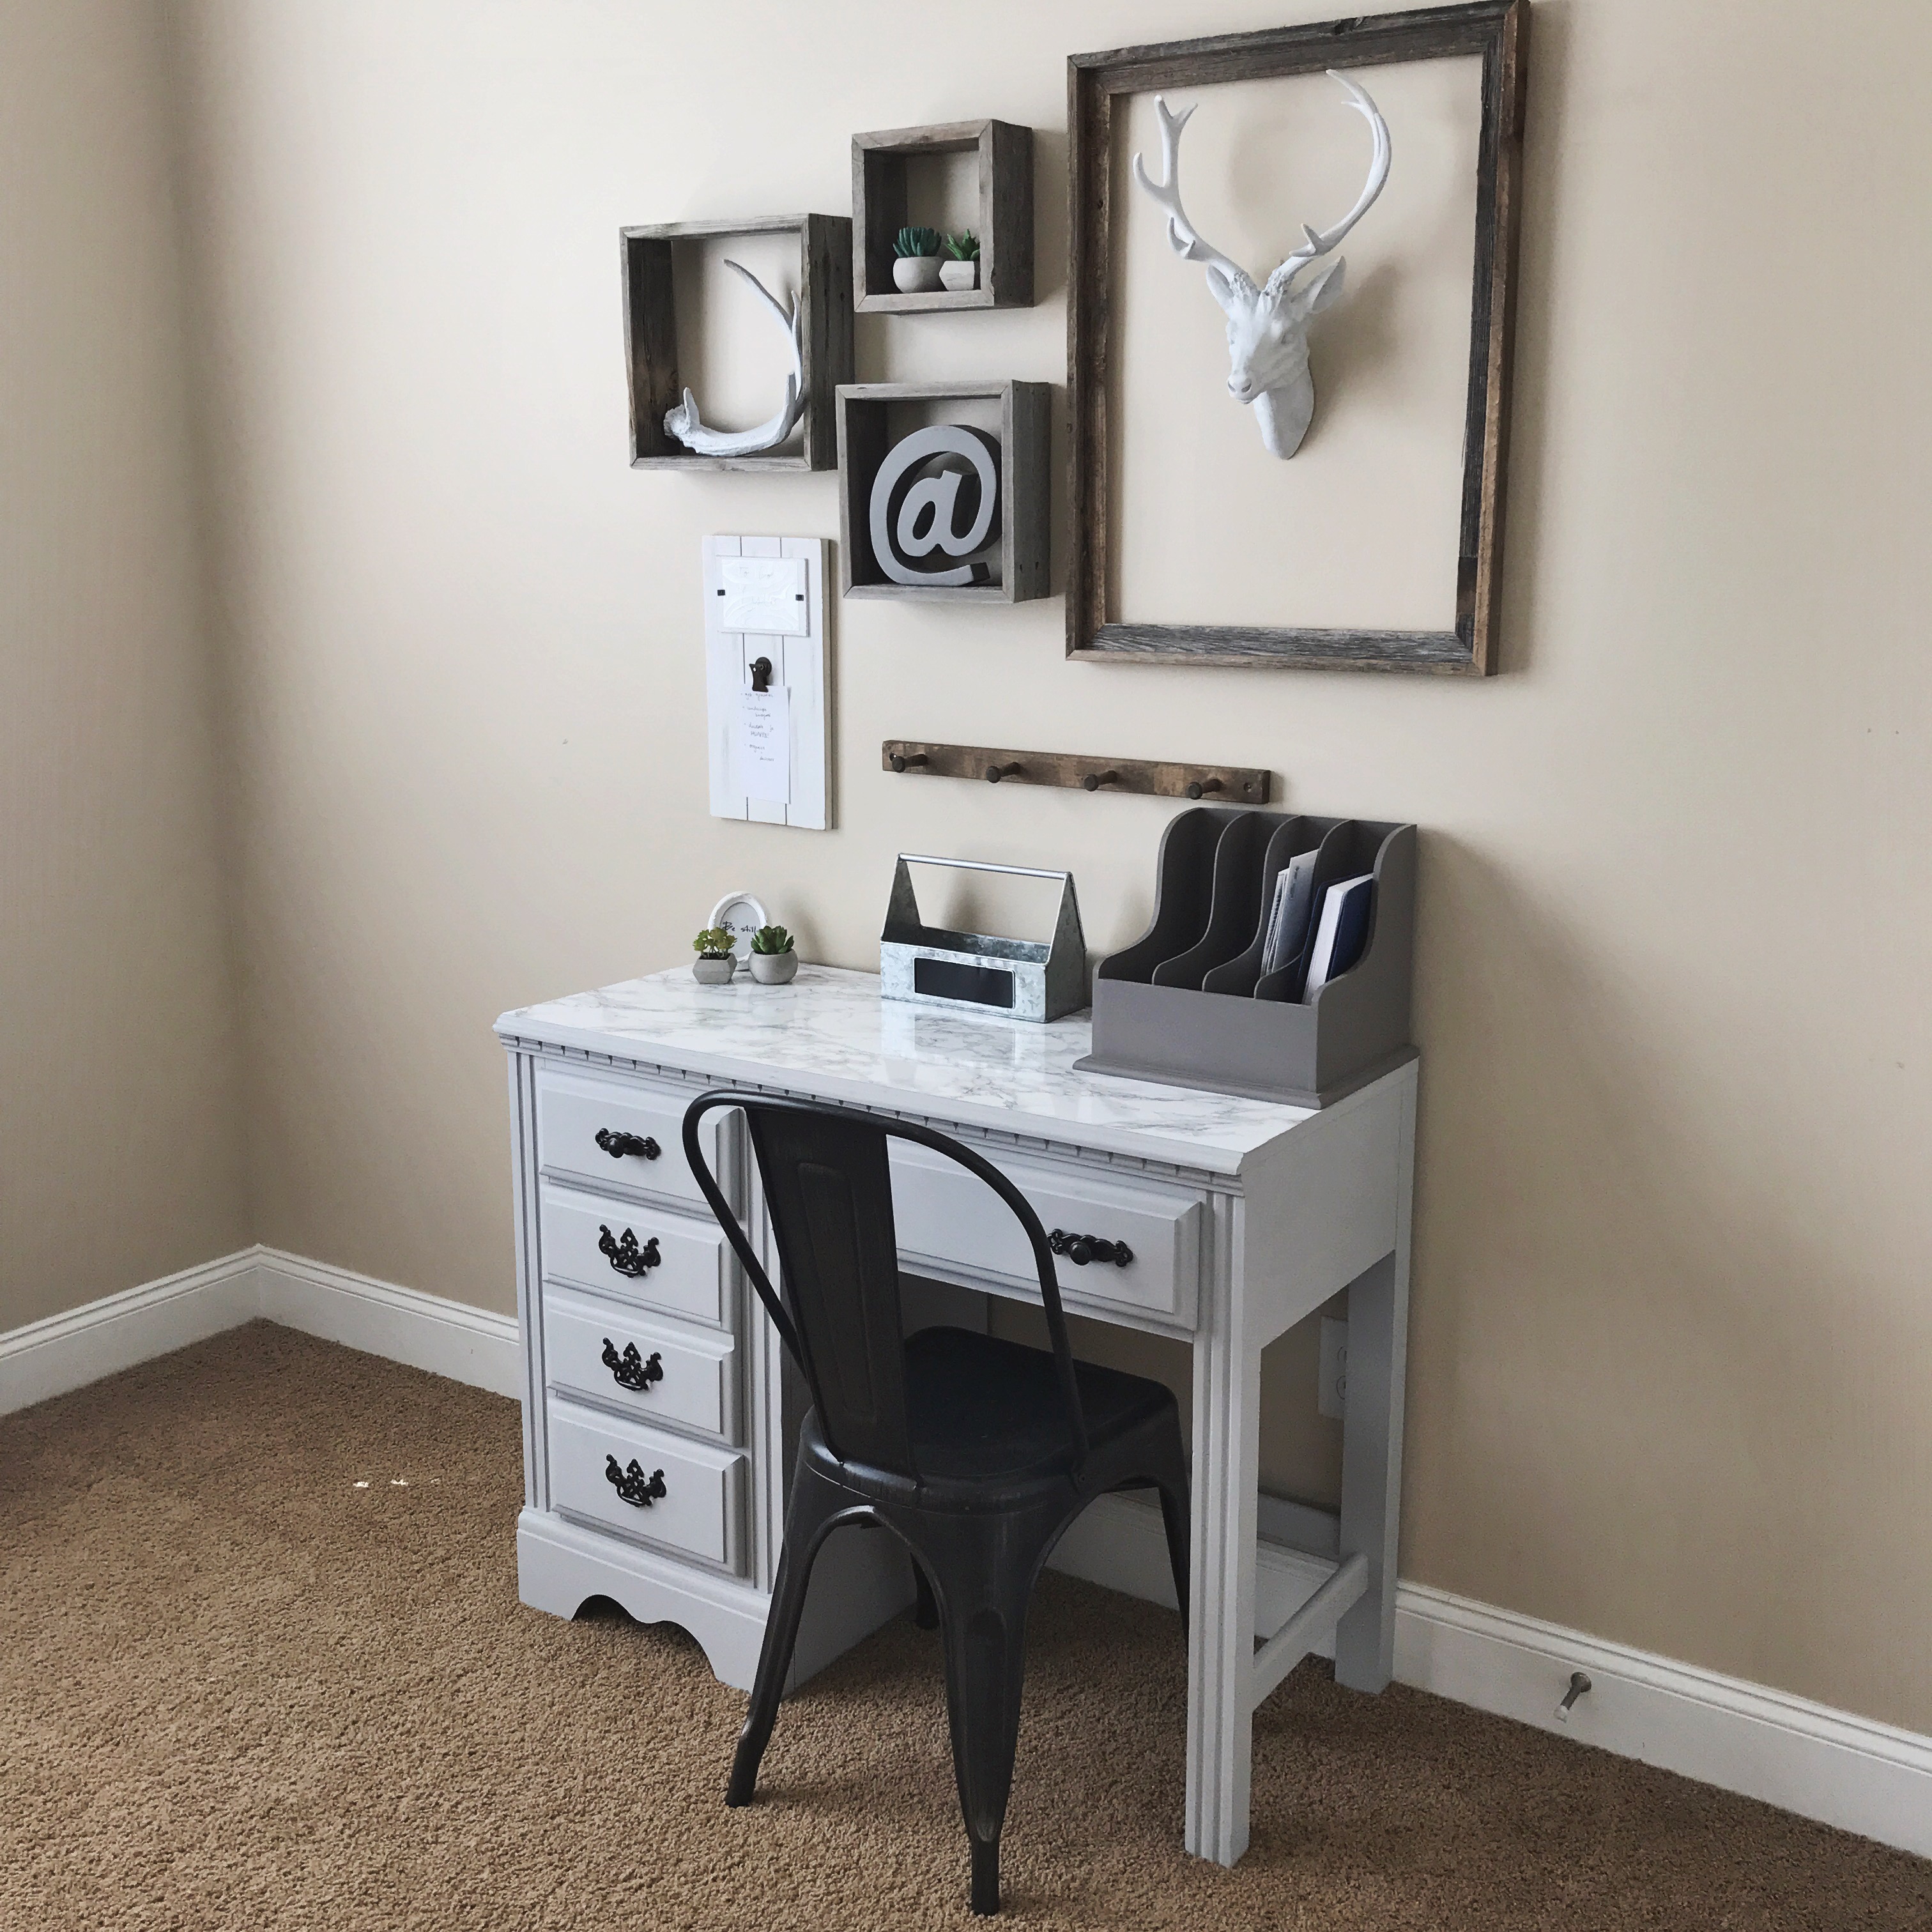 Diy Marble Desk Refinish Our New Office Konnor With A K